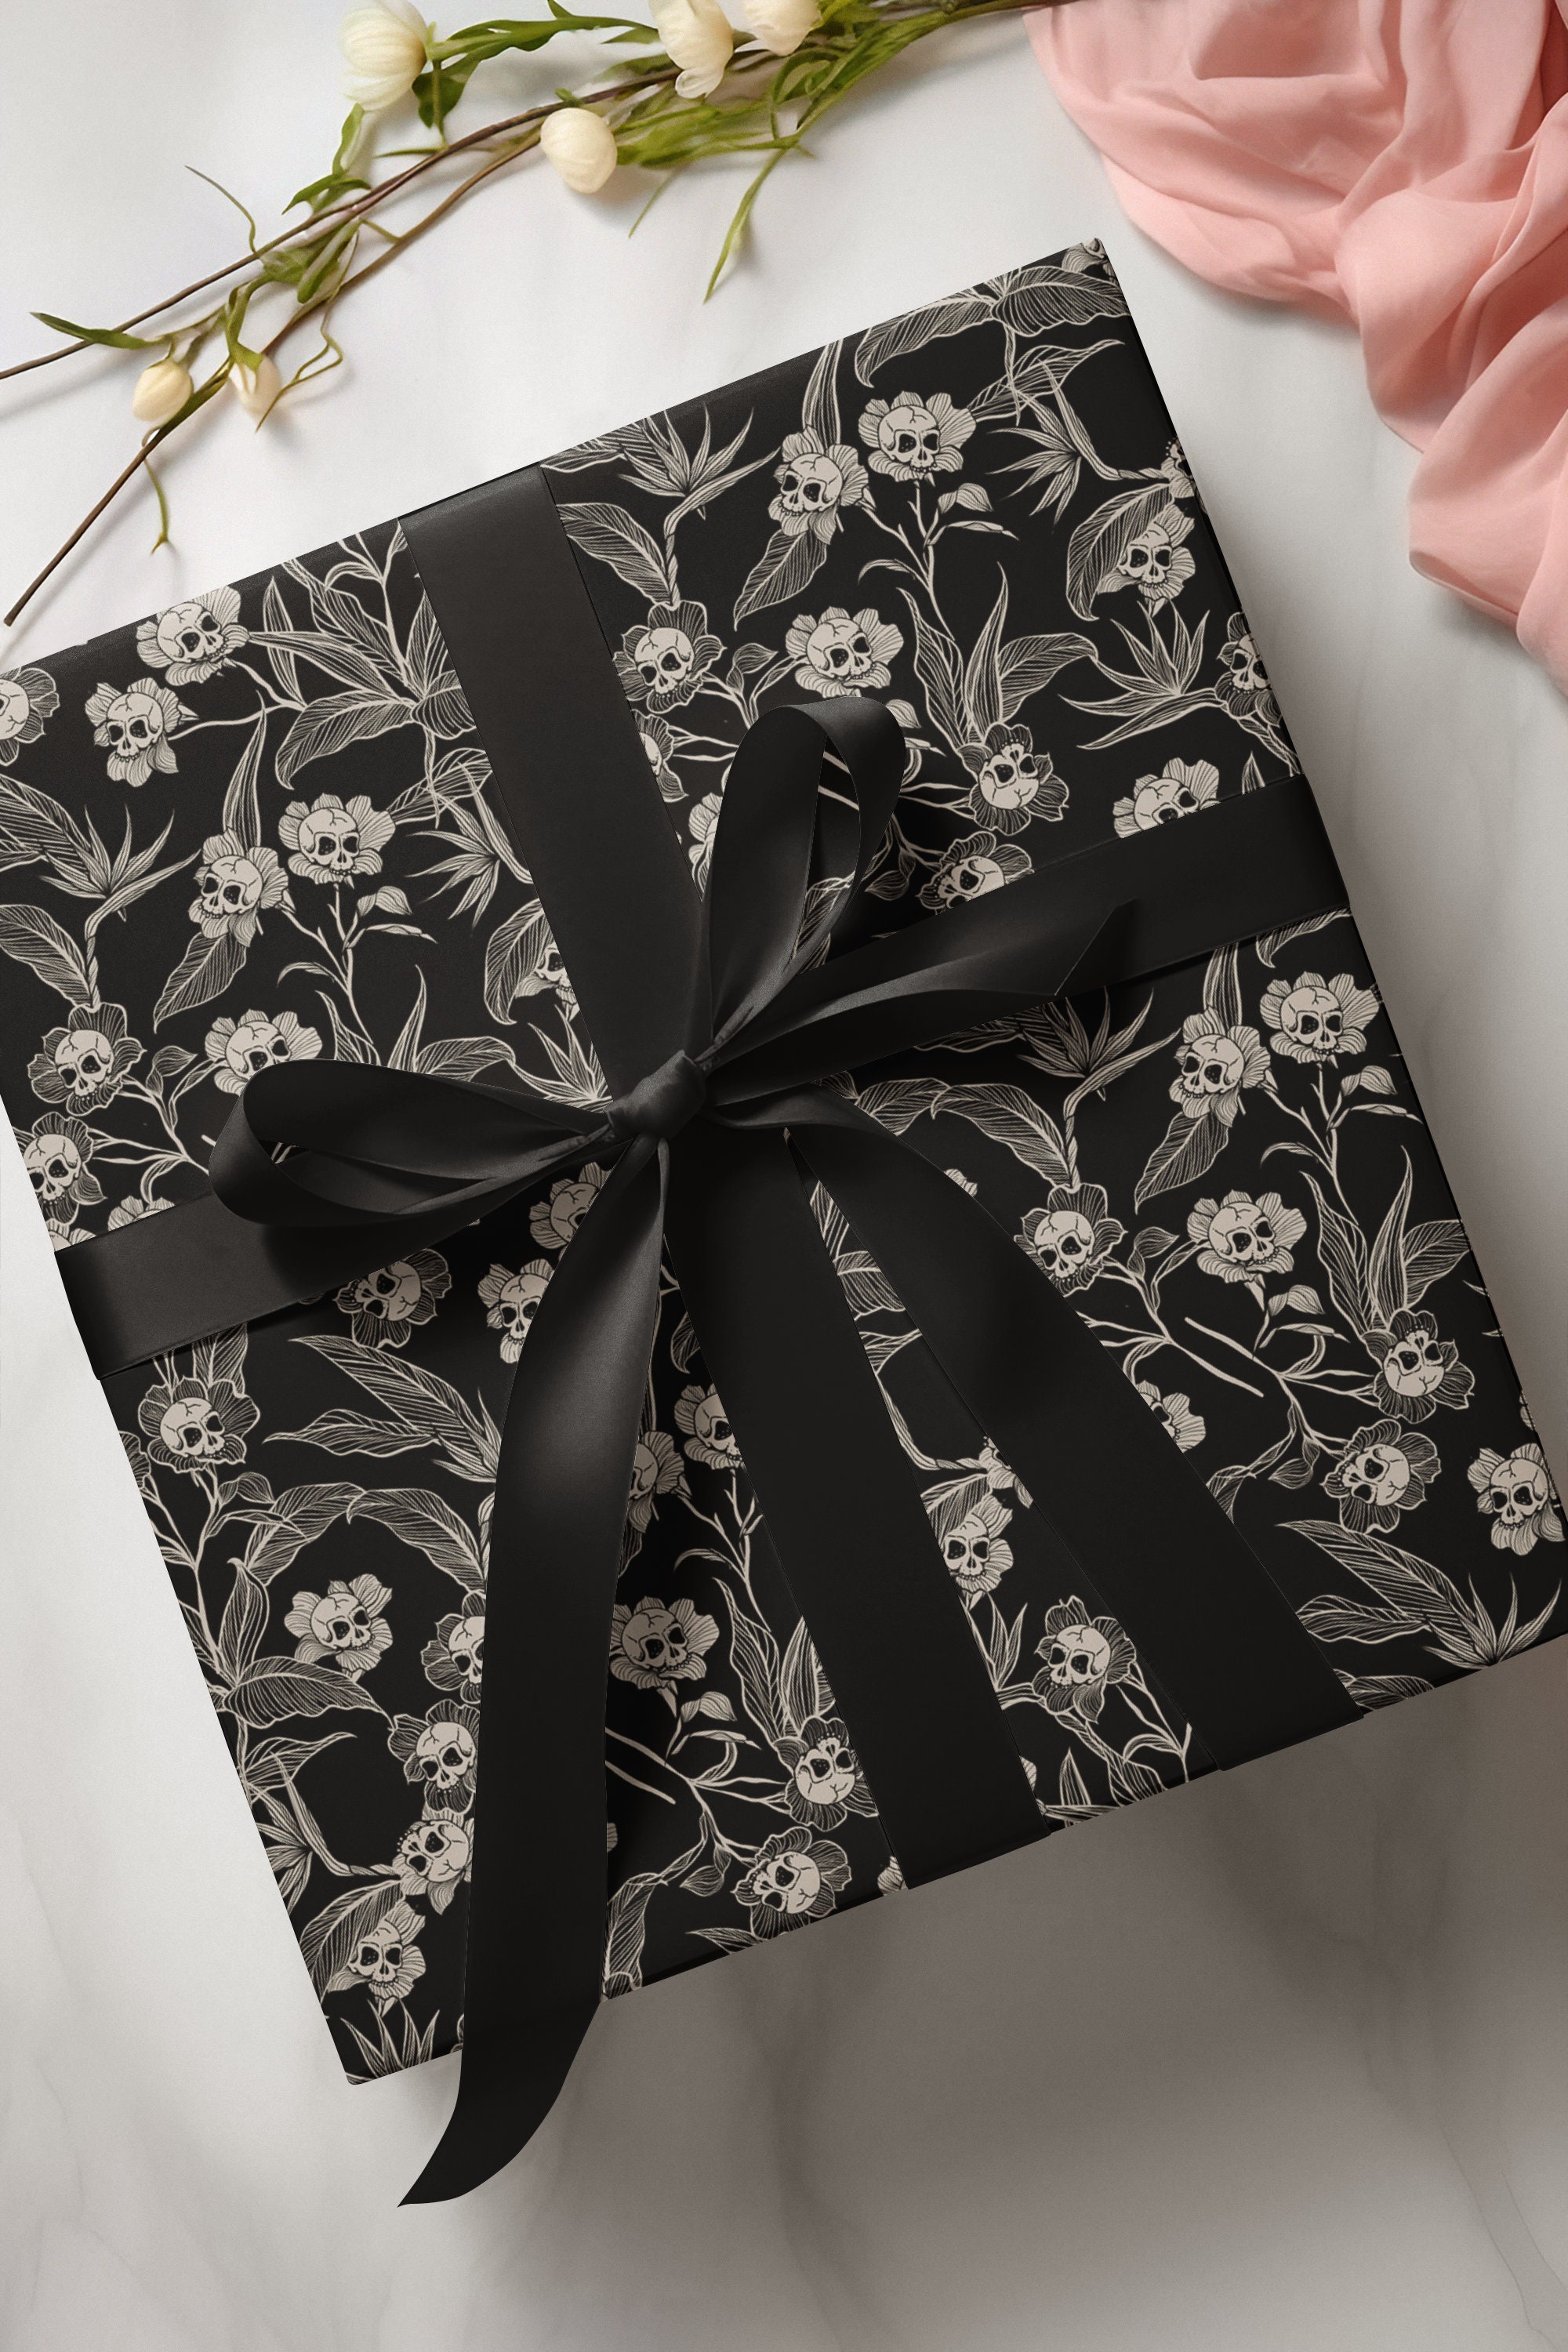 Holiday Dark Floral Gift Wrapping Paper, Hand Drawn Flowers Pattern Gift  Wrap Pack of 3 Sheets, Painted Flowers on Black Background 